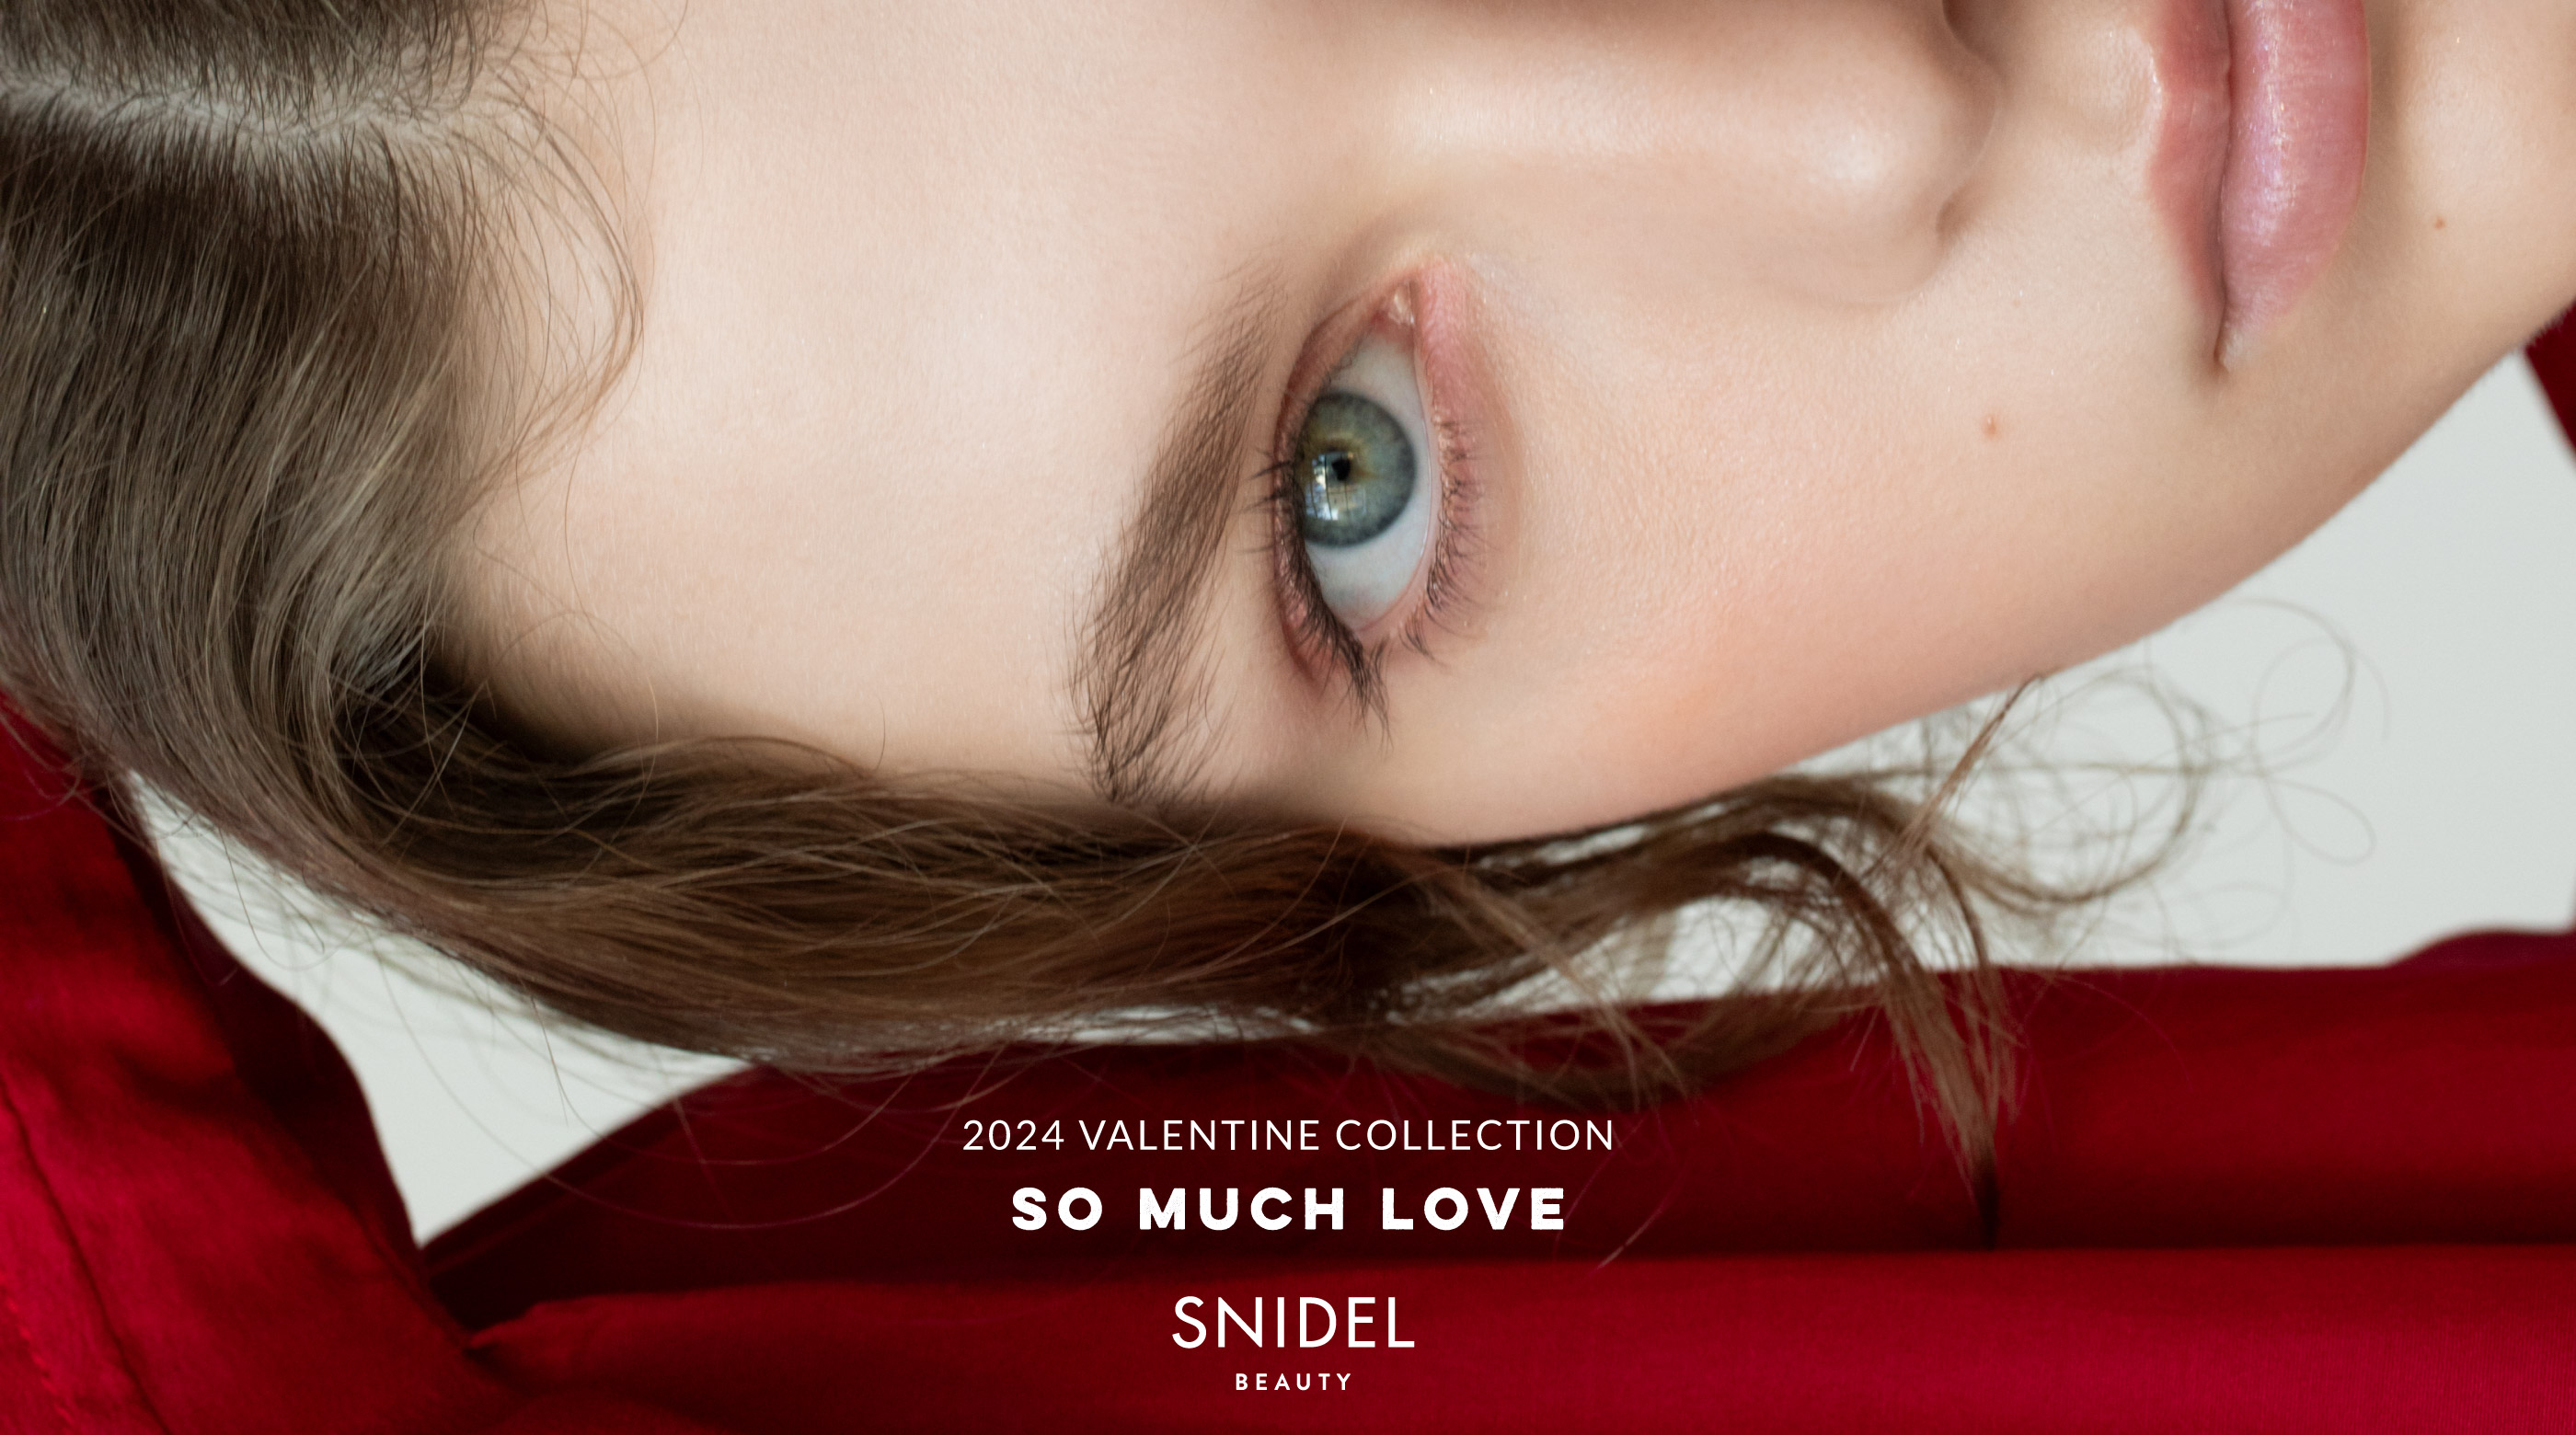 SNIDEL BEAUTY BEST 2024 VALENTINE COLLECTION SO MUCH LOVE